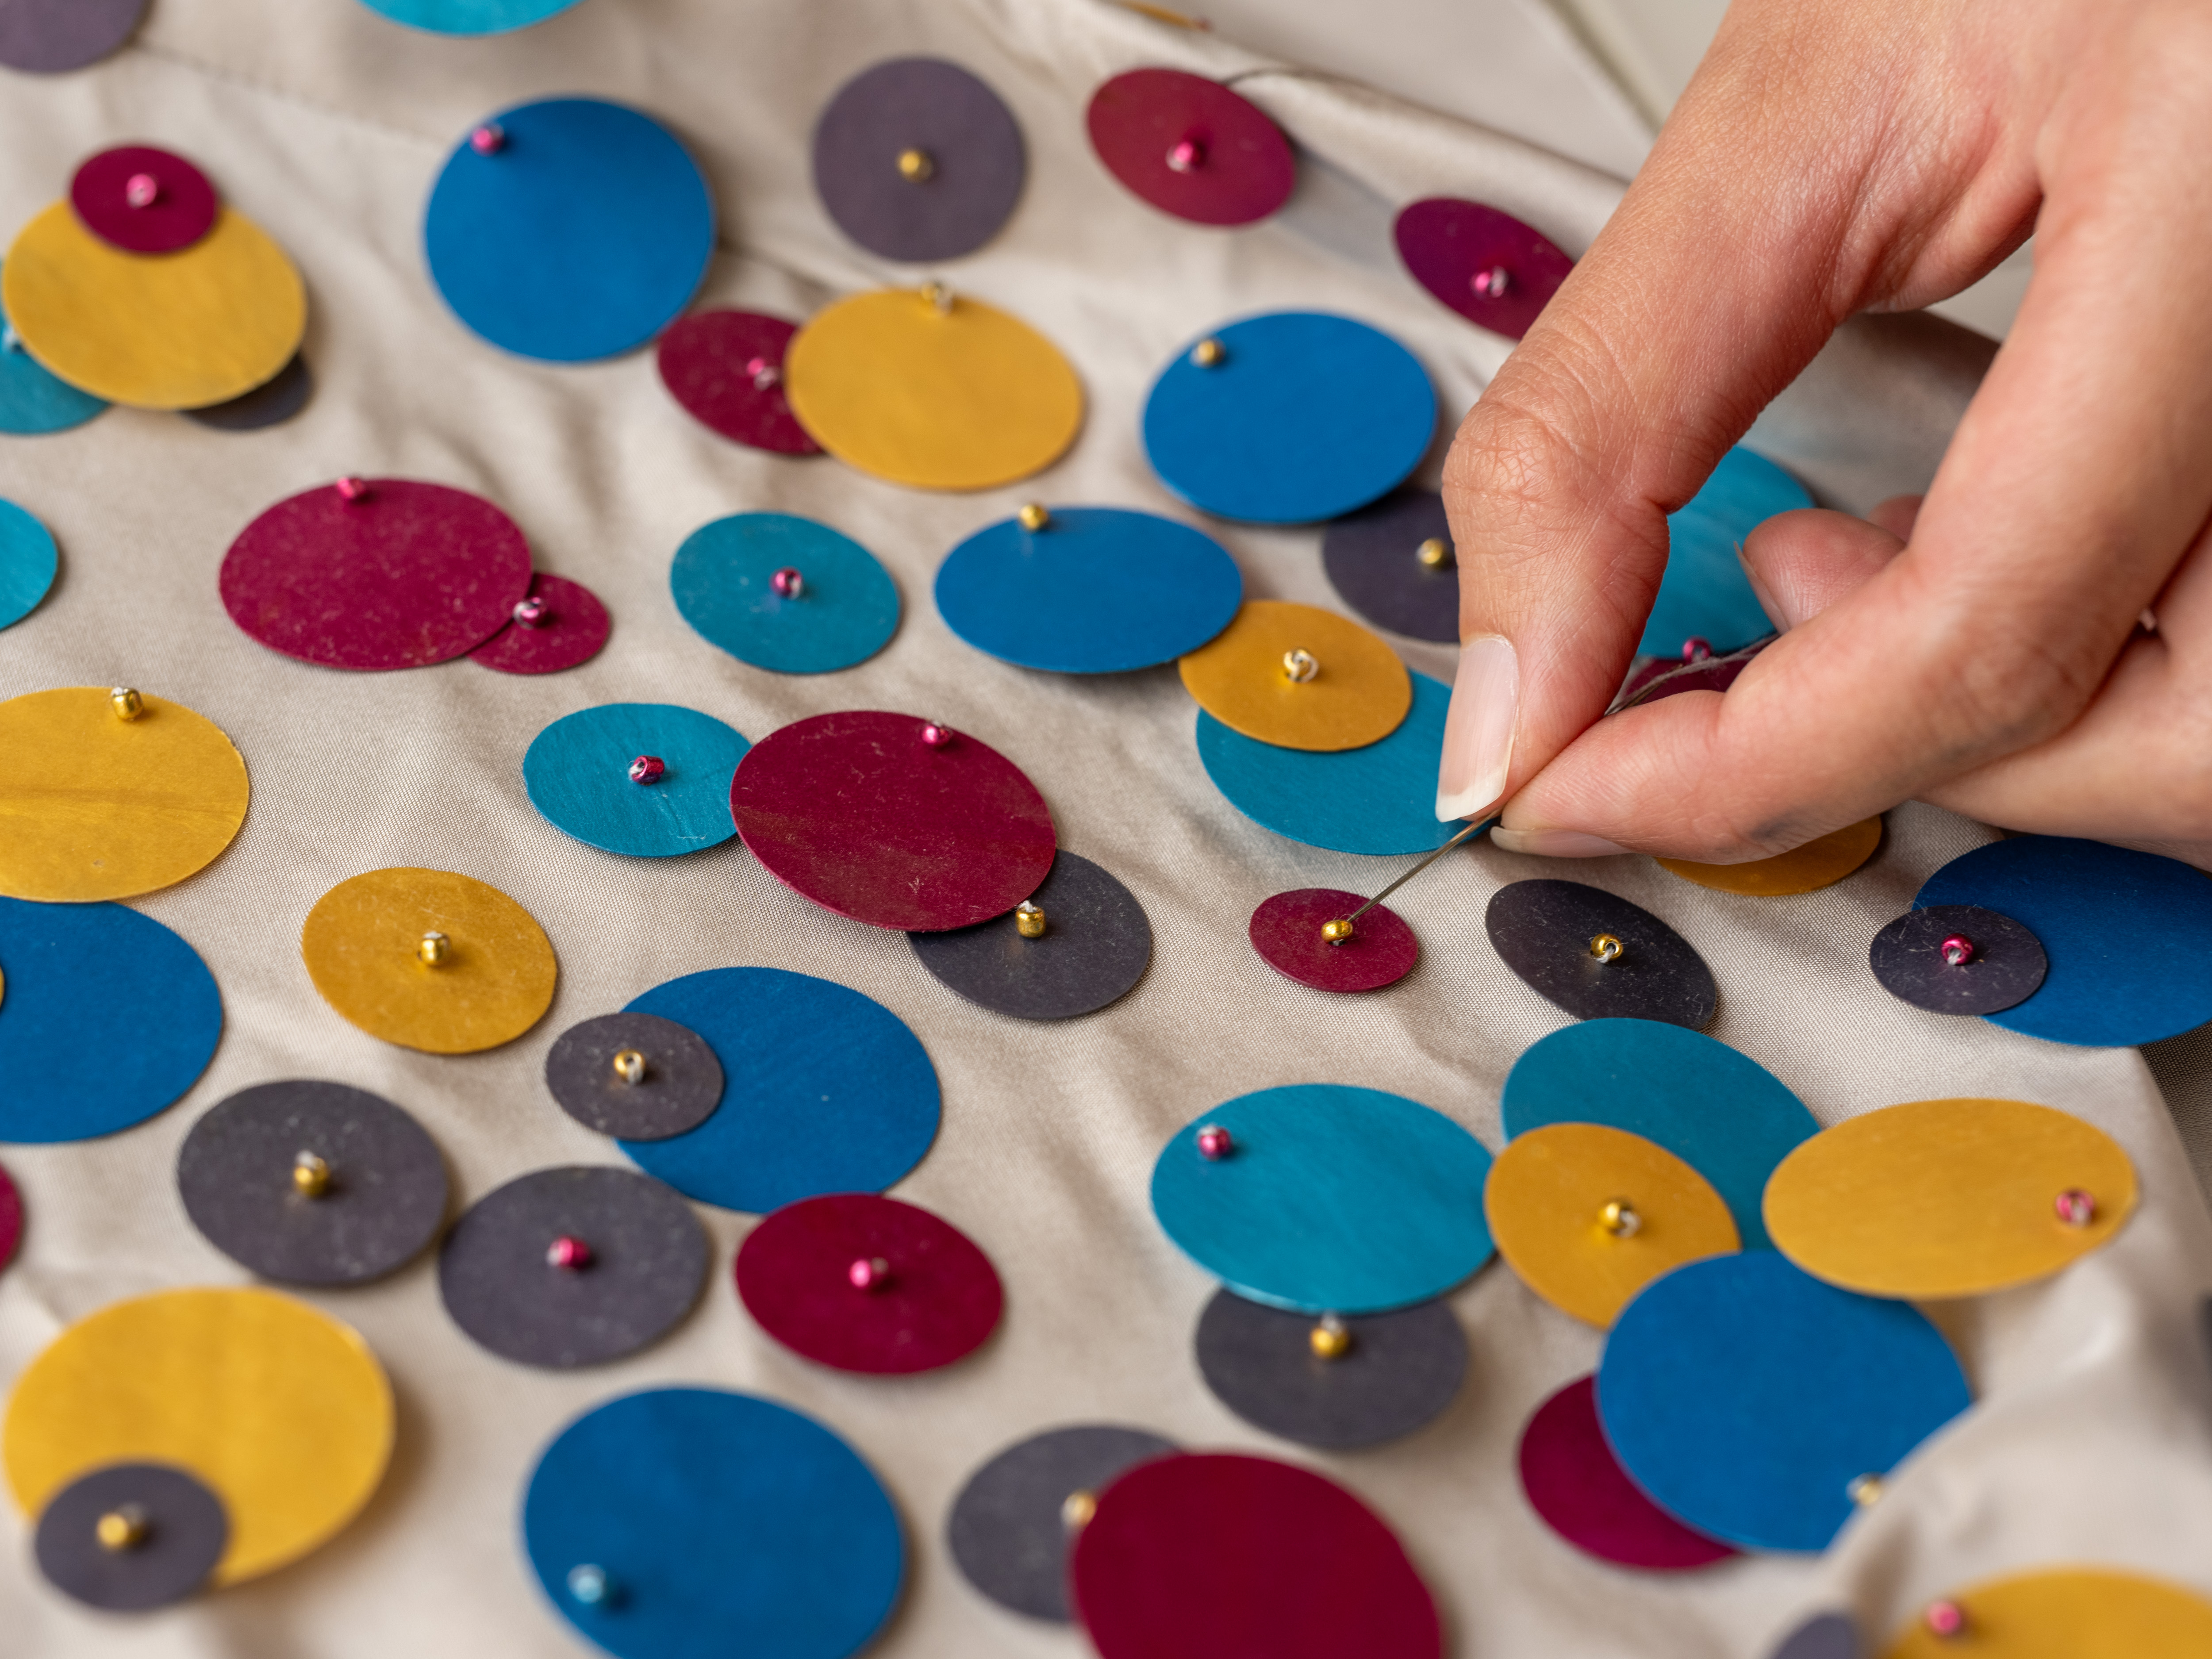 A hand sews a bead onto a cloth with sequins of differing sizes and colors.